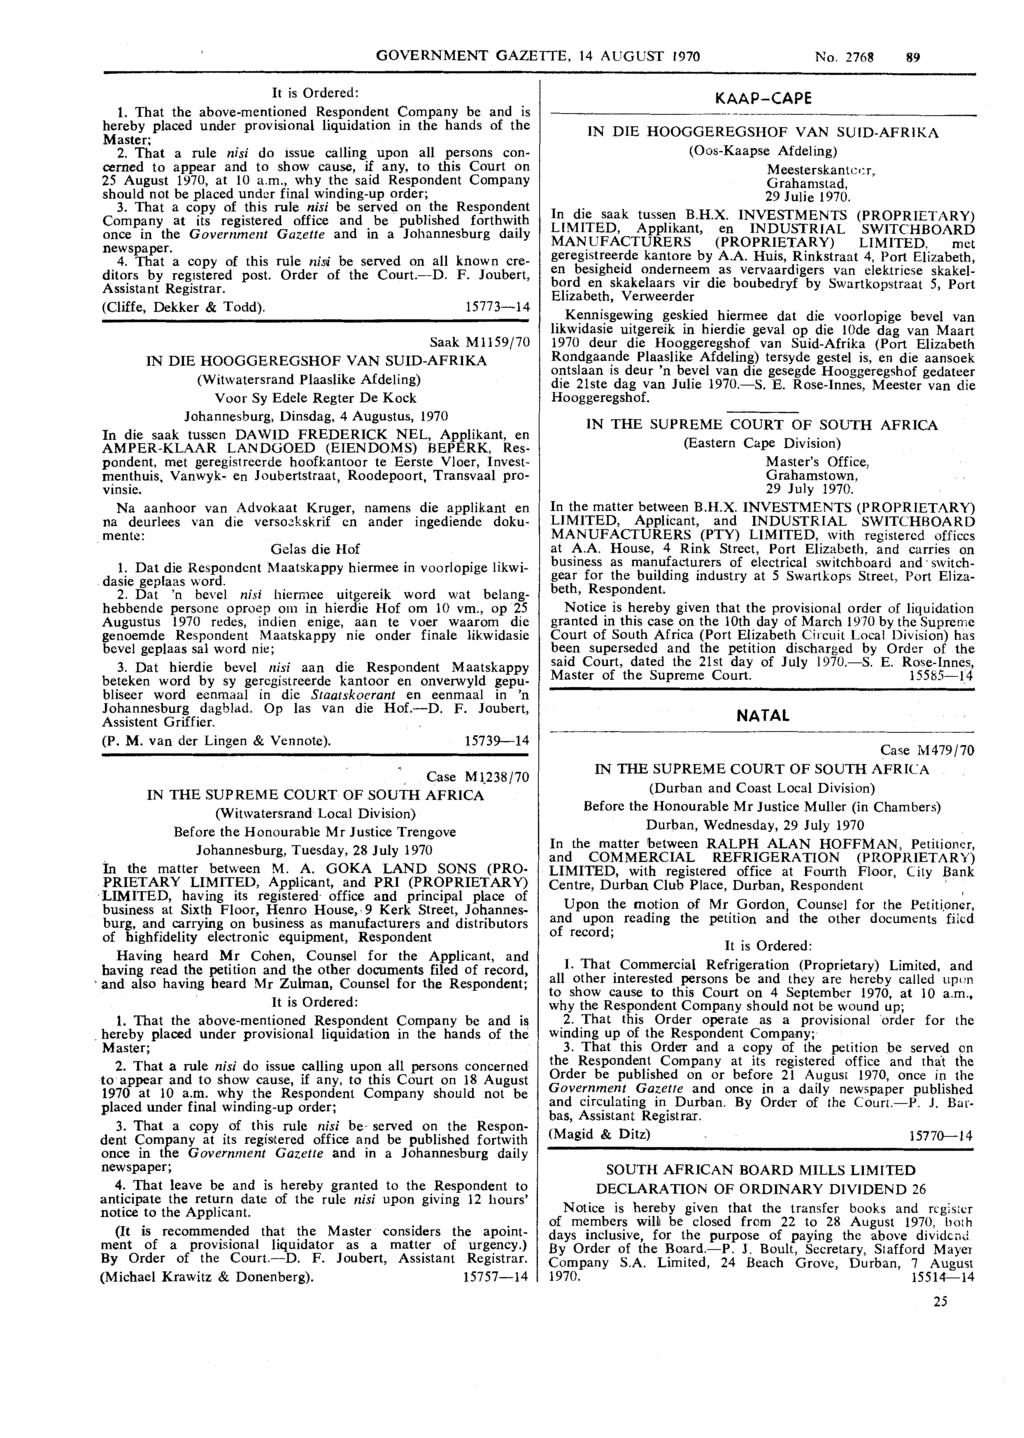 GOVERNMENT GAZETTE, 14 AUGUST 1970 No. 2768 89 It is Ordered: 1. That the above-mentioned Respondent Company be and is hereby placed under provisional liquidation in the hands of the Master; 2.